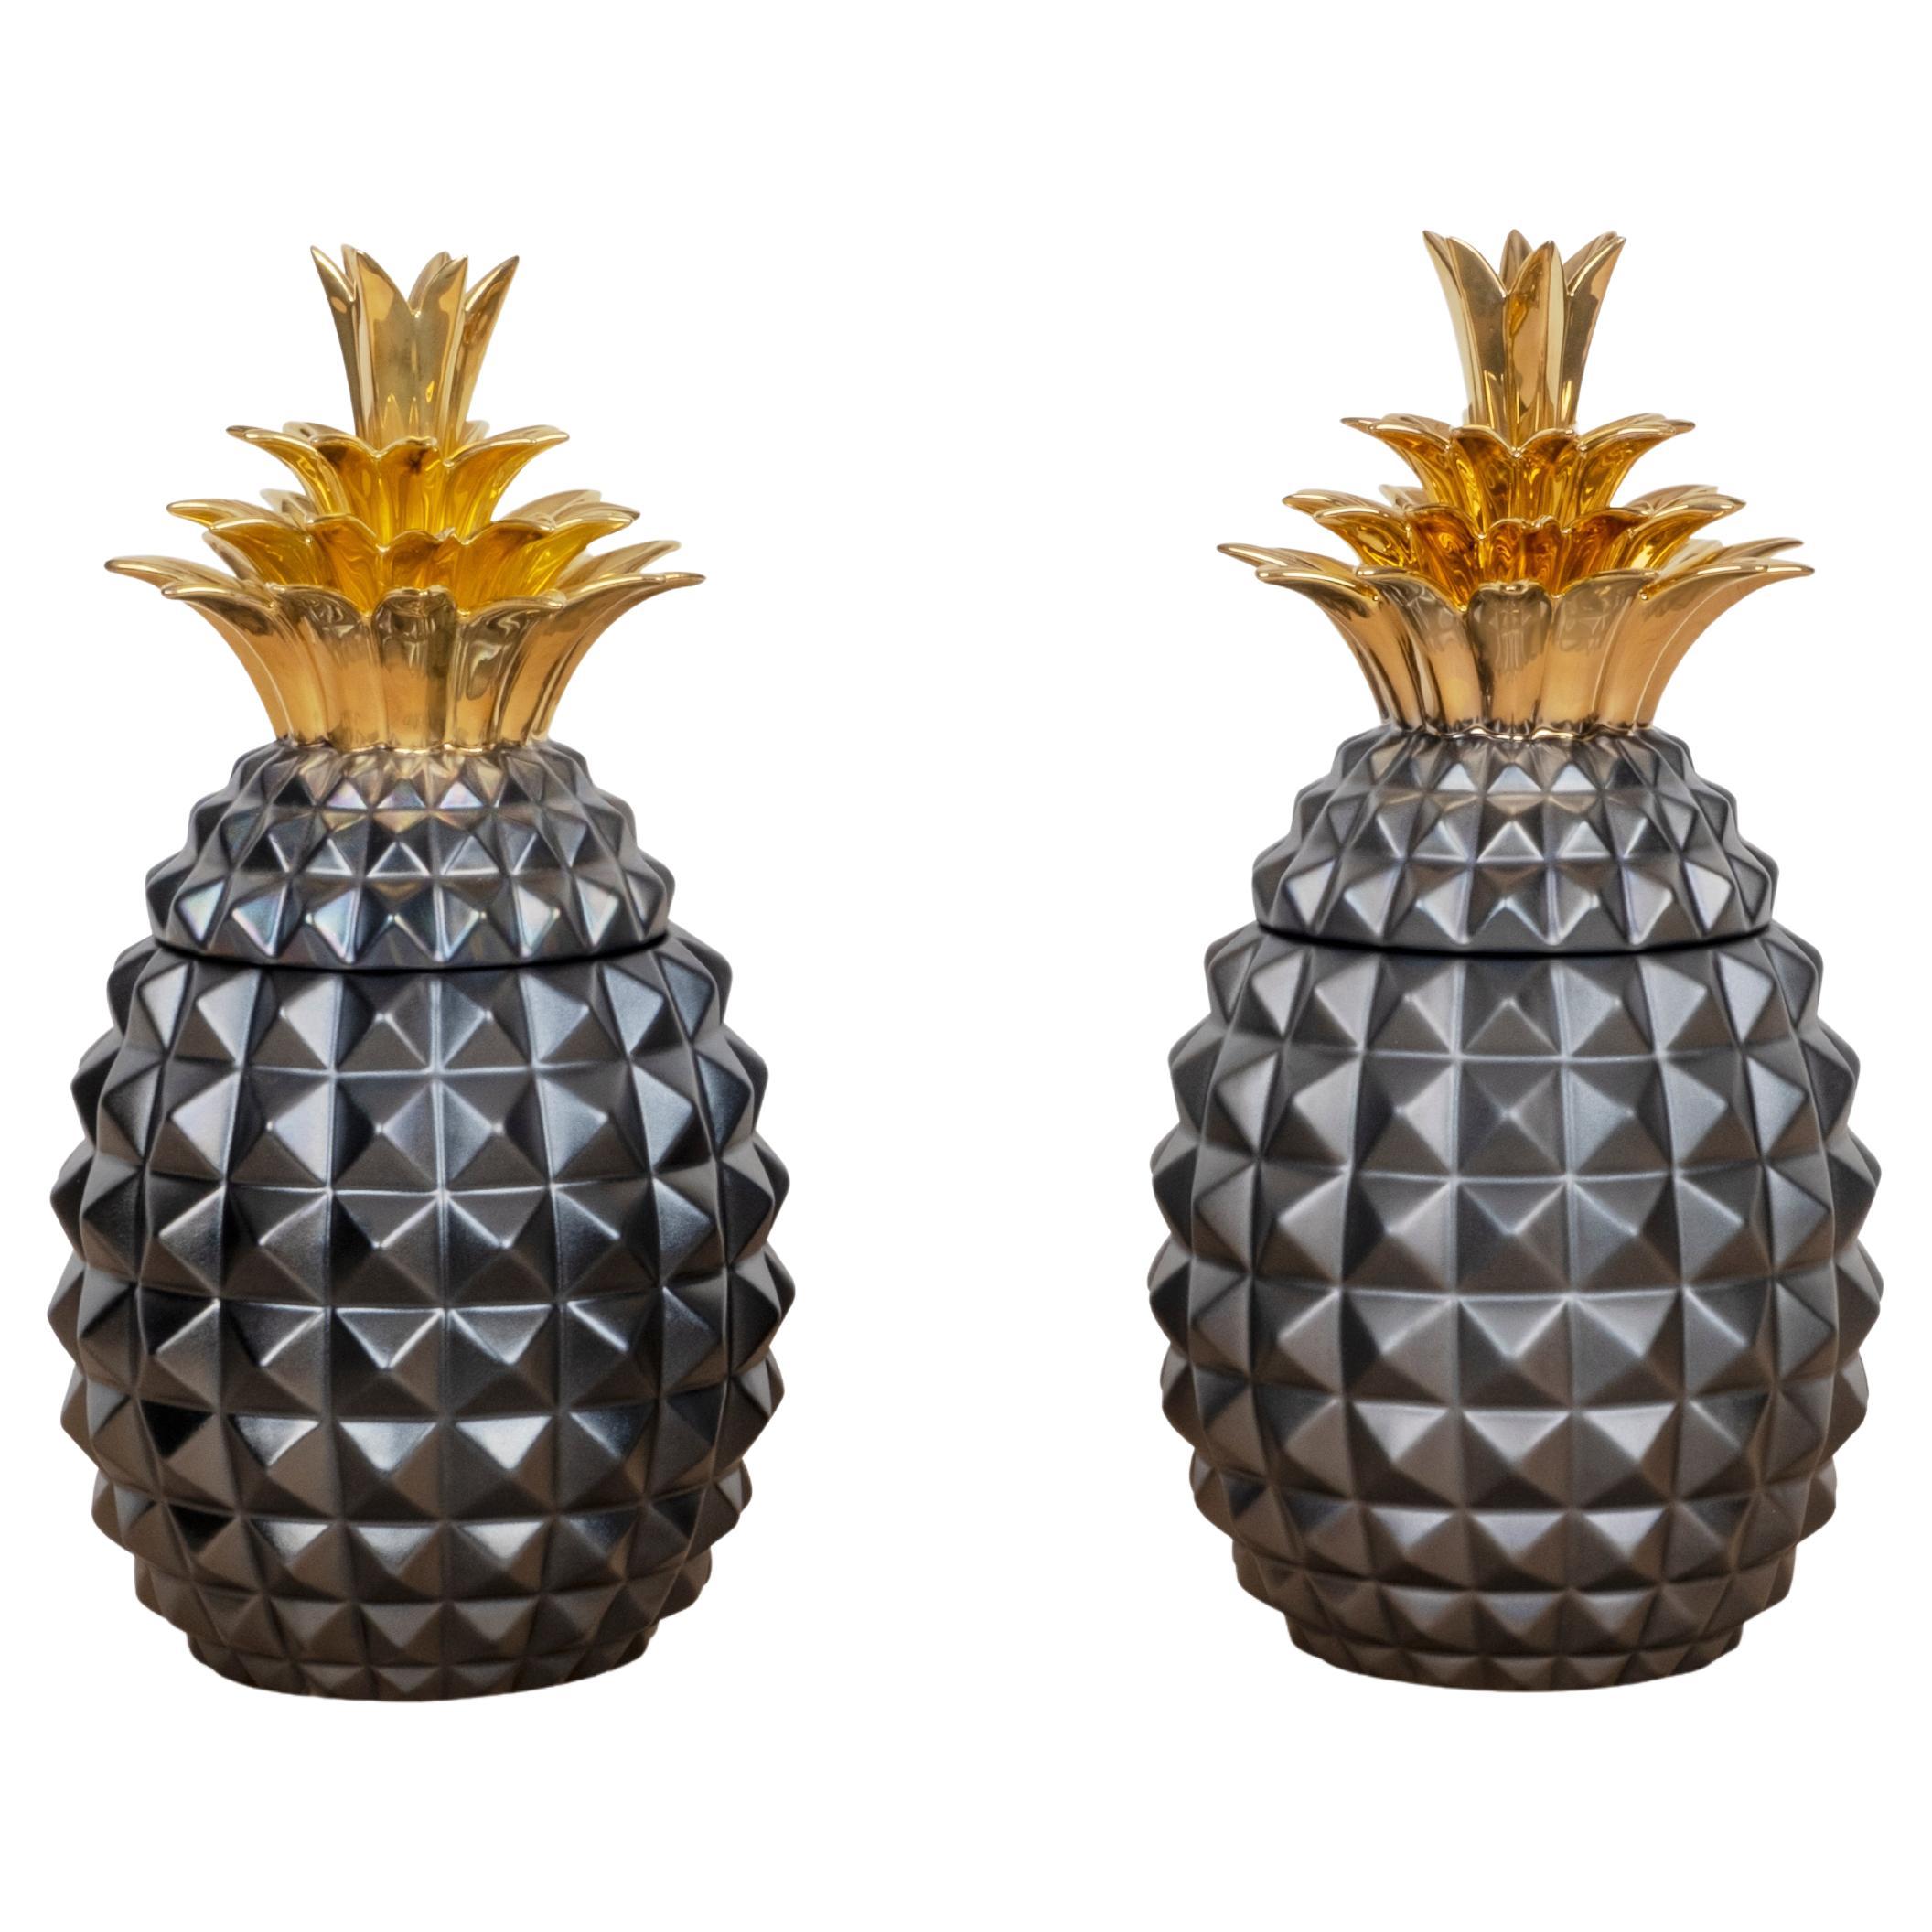 Set/2 Pineapple Ceramic Pots, Black, Handmade in Portugal by Lusitanus Home For Sale